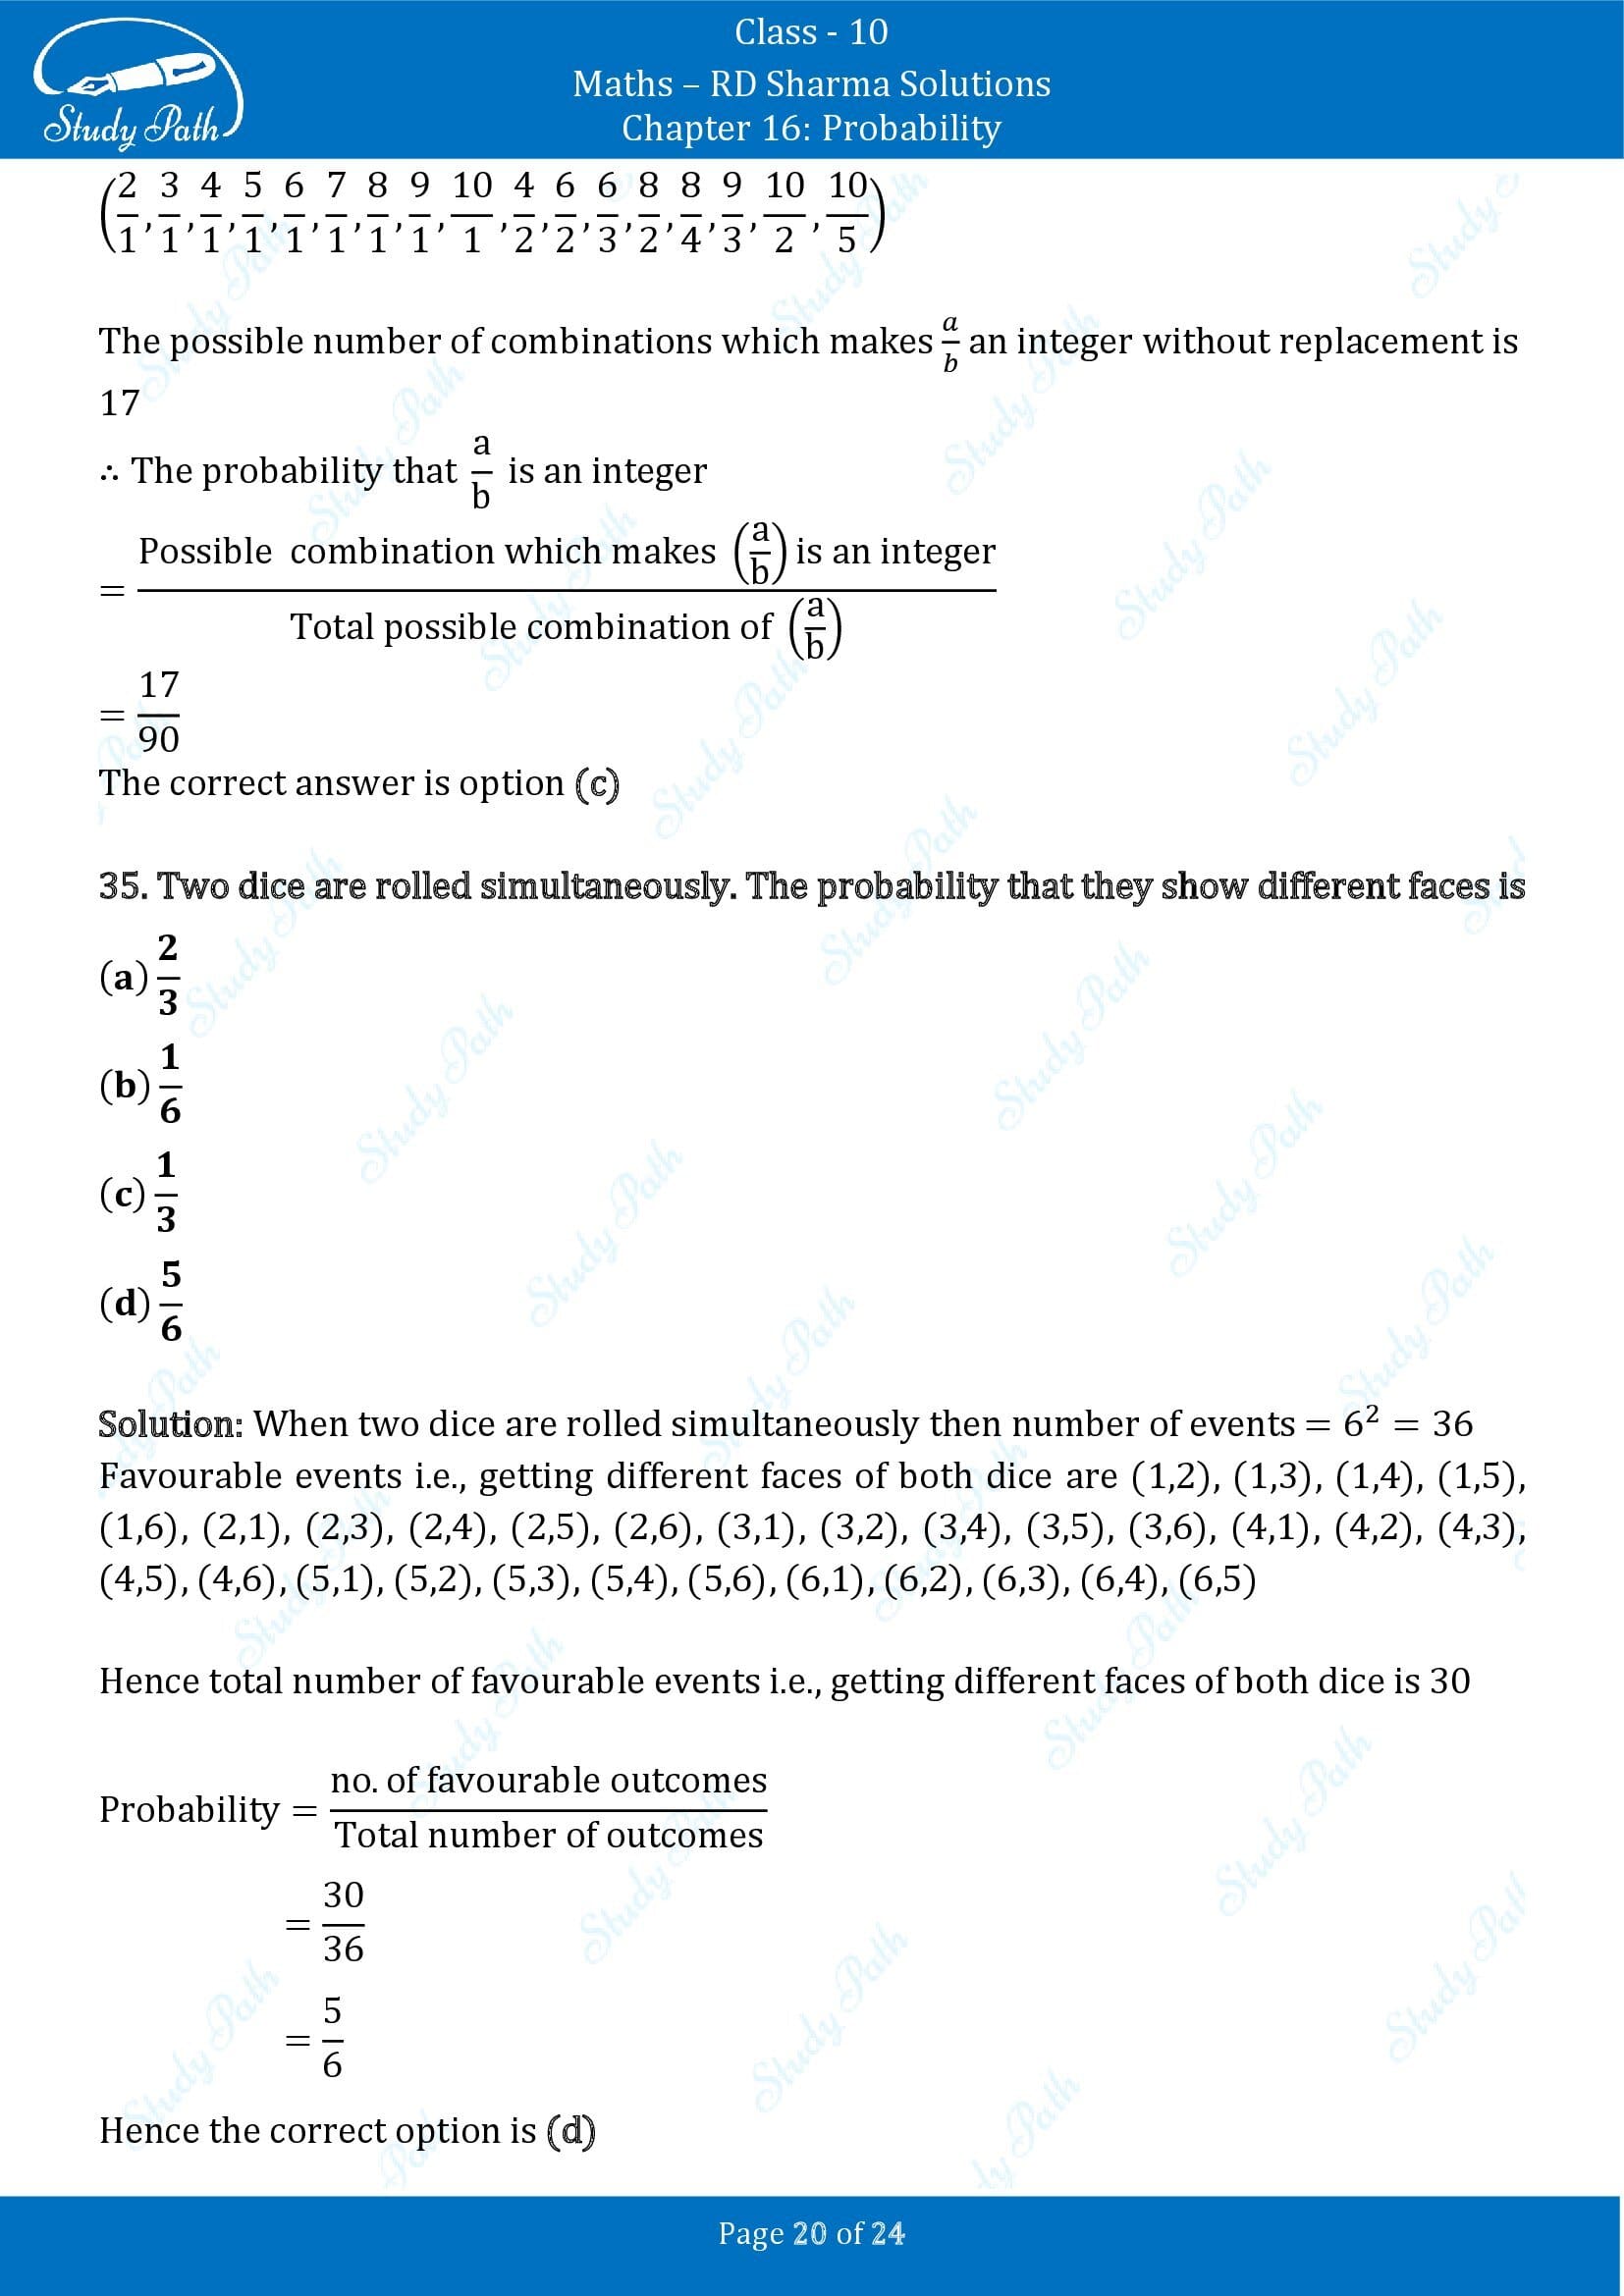 RD Sharma Solutions Class 10 Chapter 16 Probability Multiple Choice Question MCQs 00020